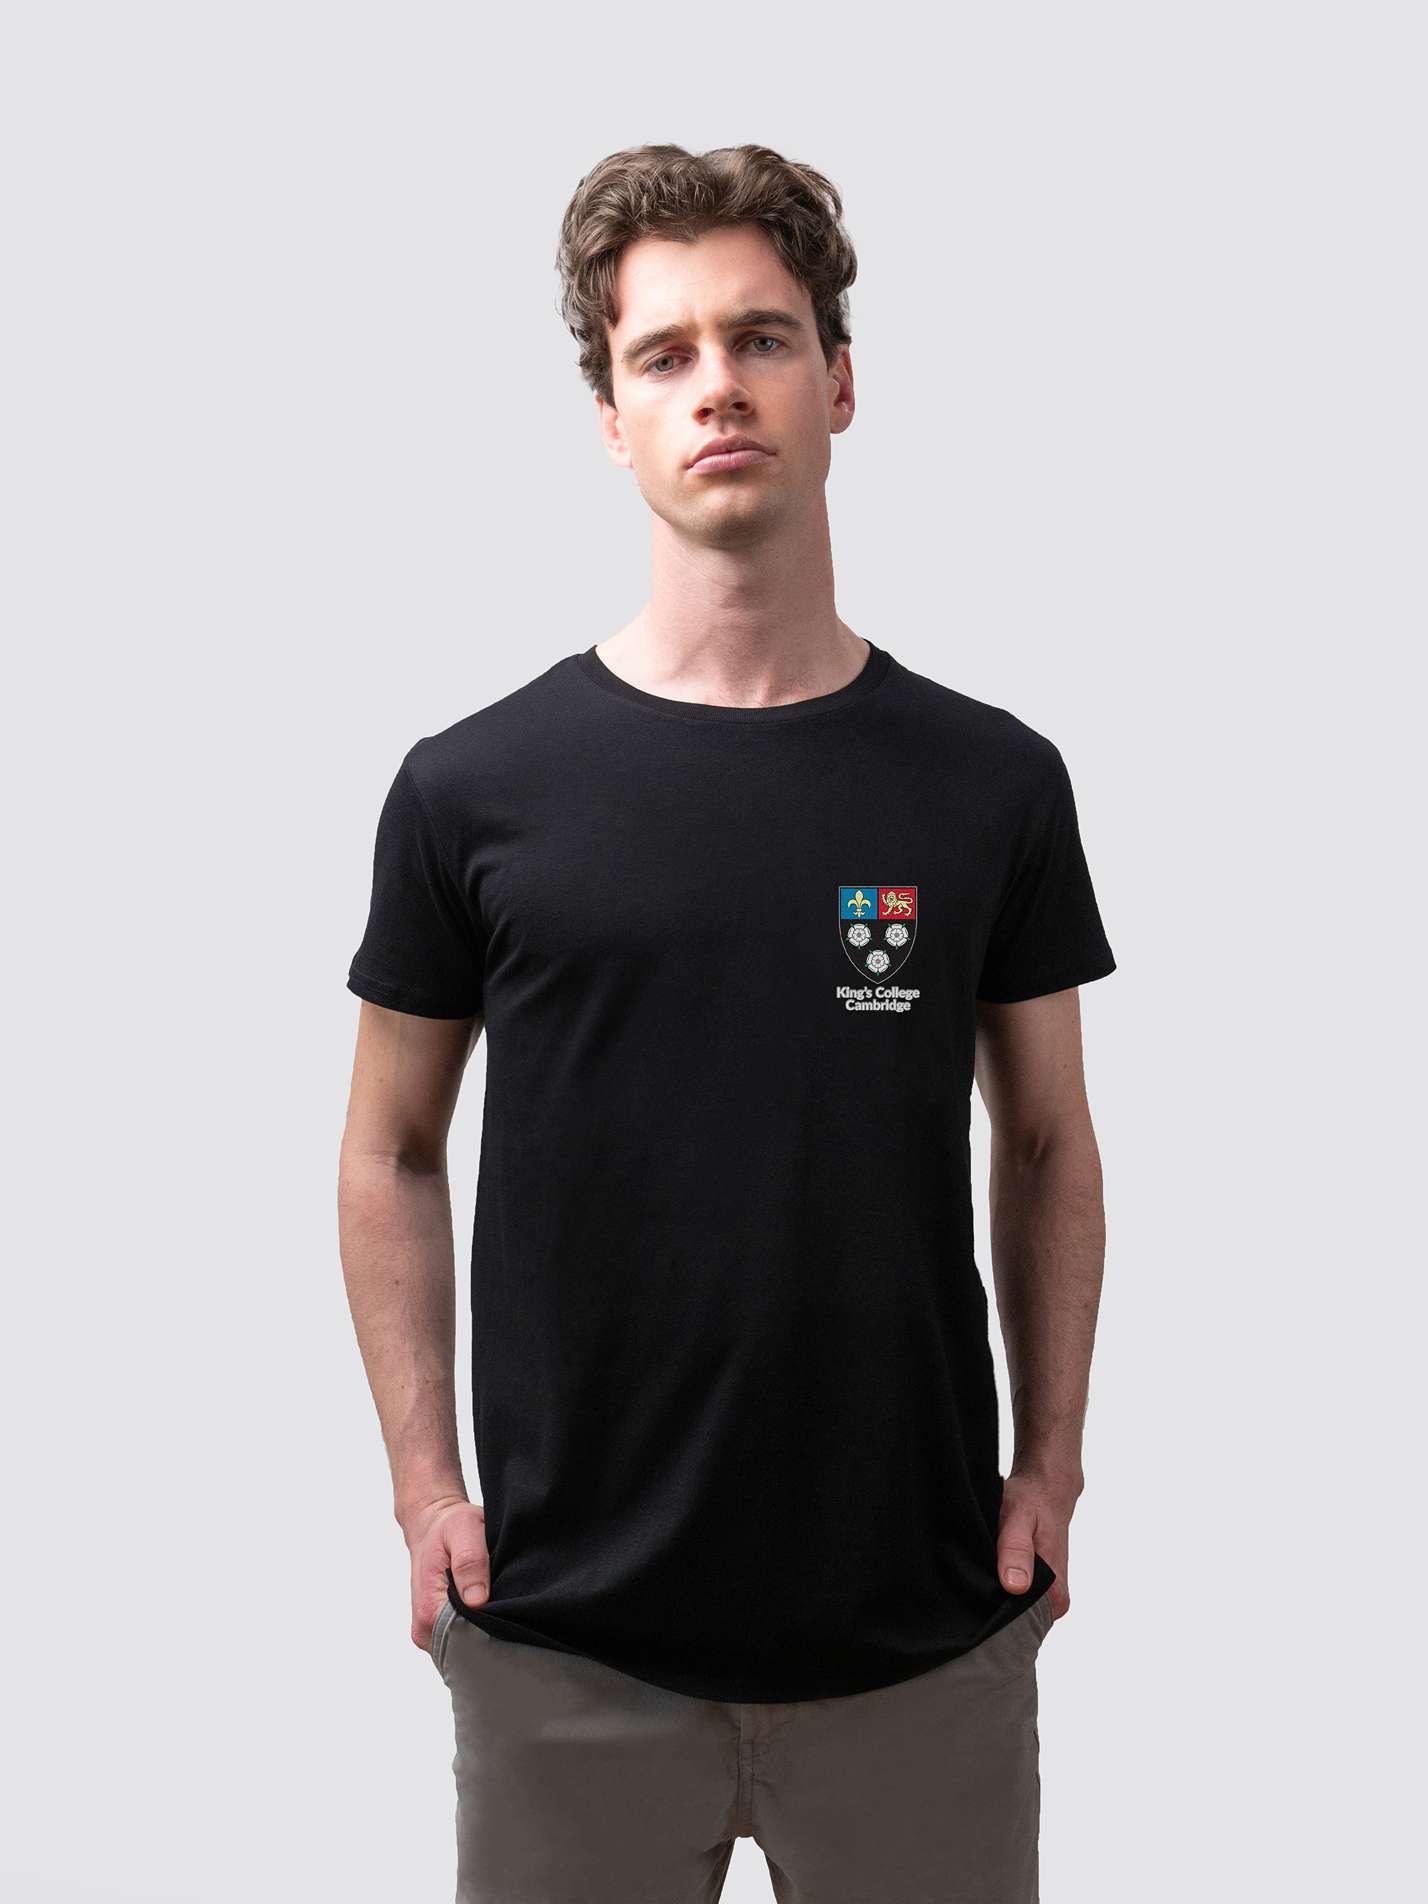 Sustainable King's t-shirt, made from organic cotton